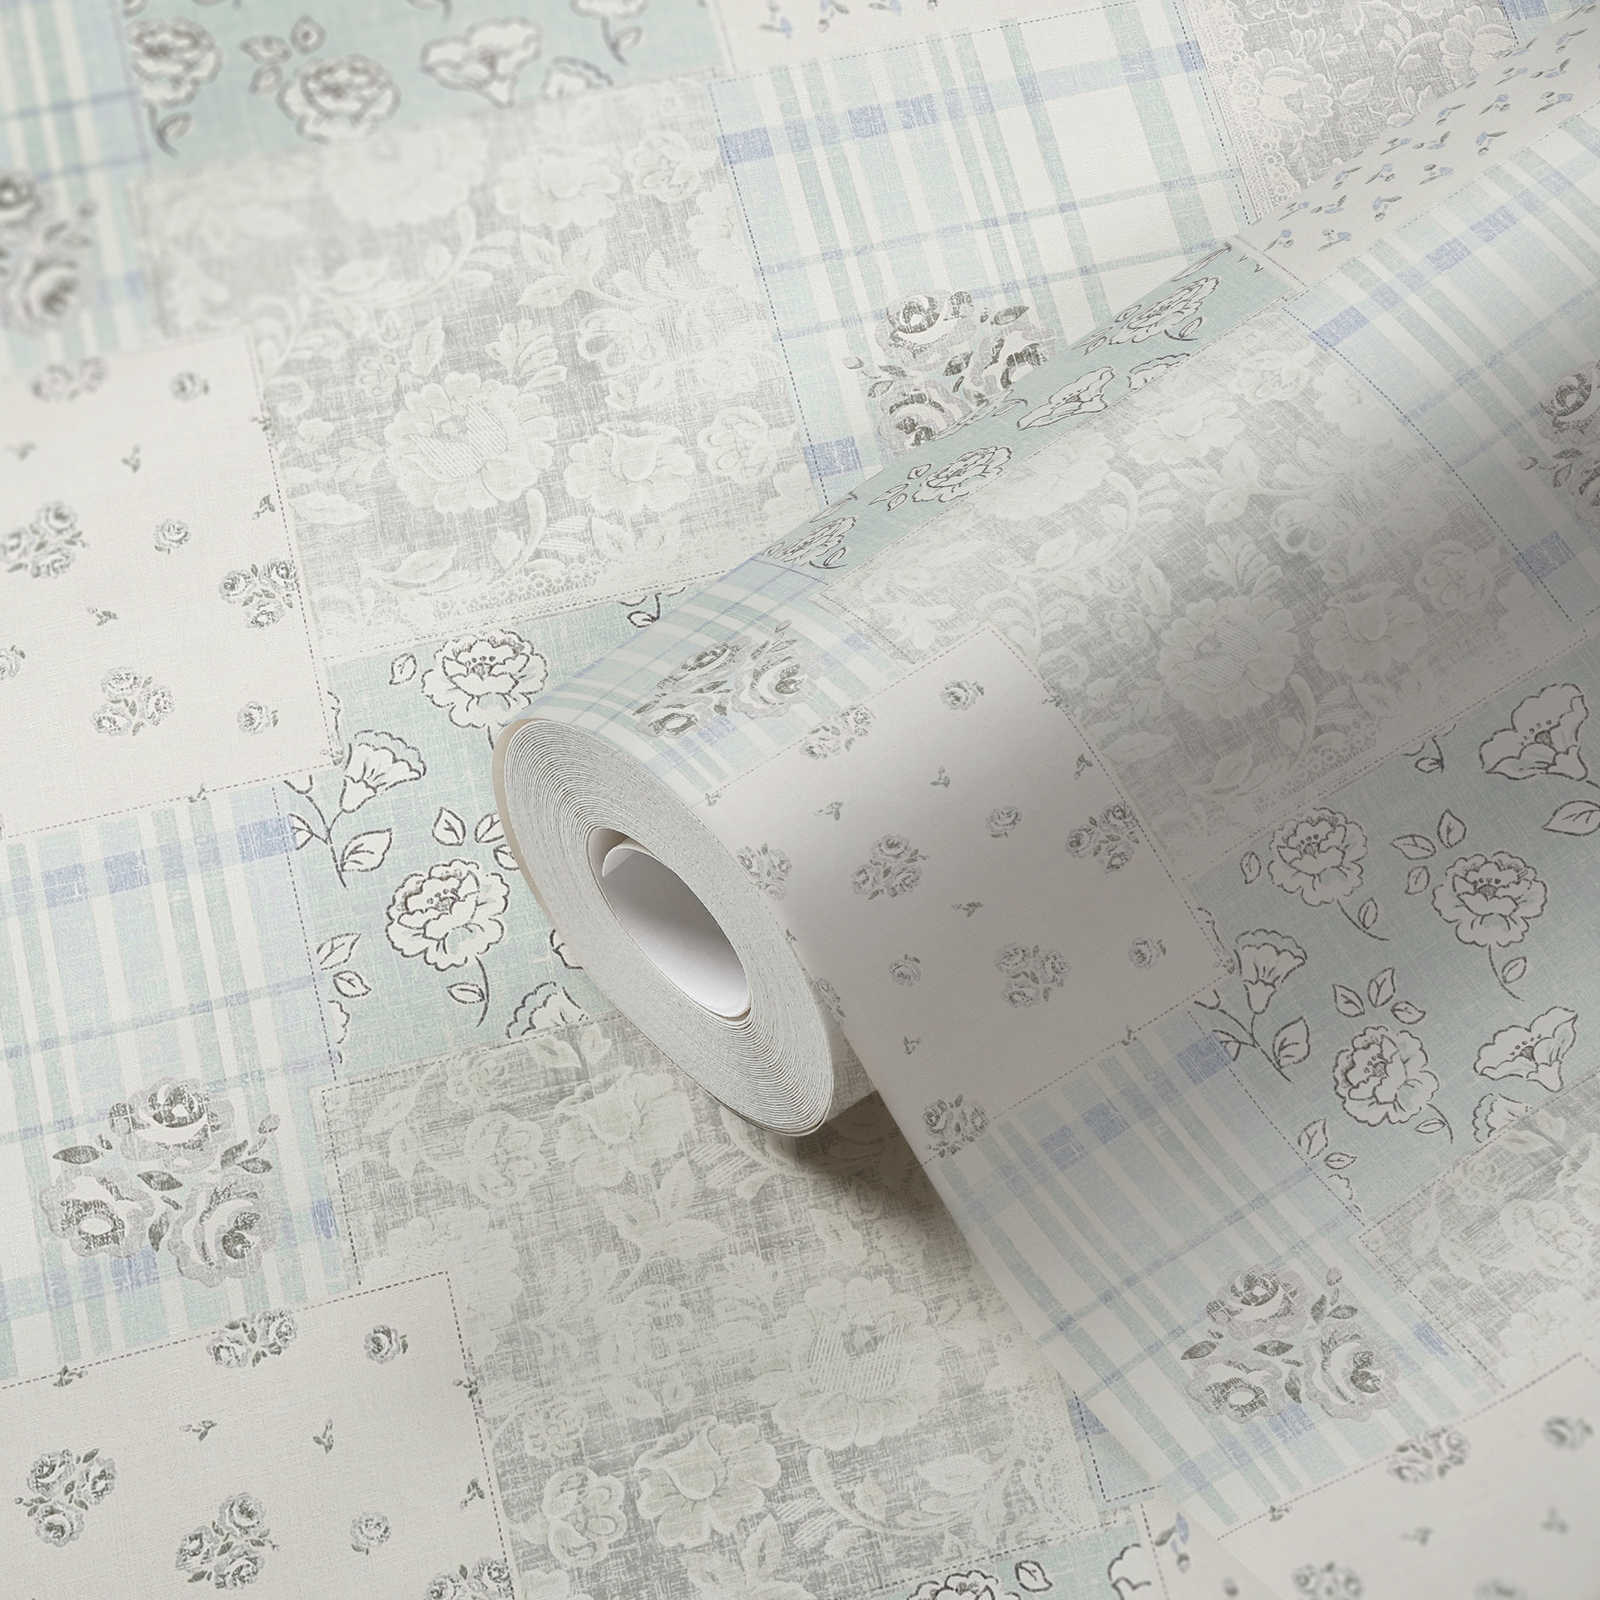             Non-woven wallpaper floral pattern and checkered country style - light blue, grey, white
        